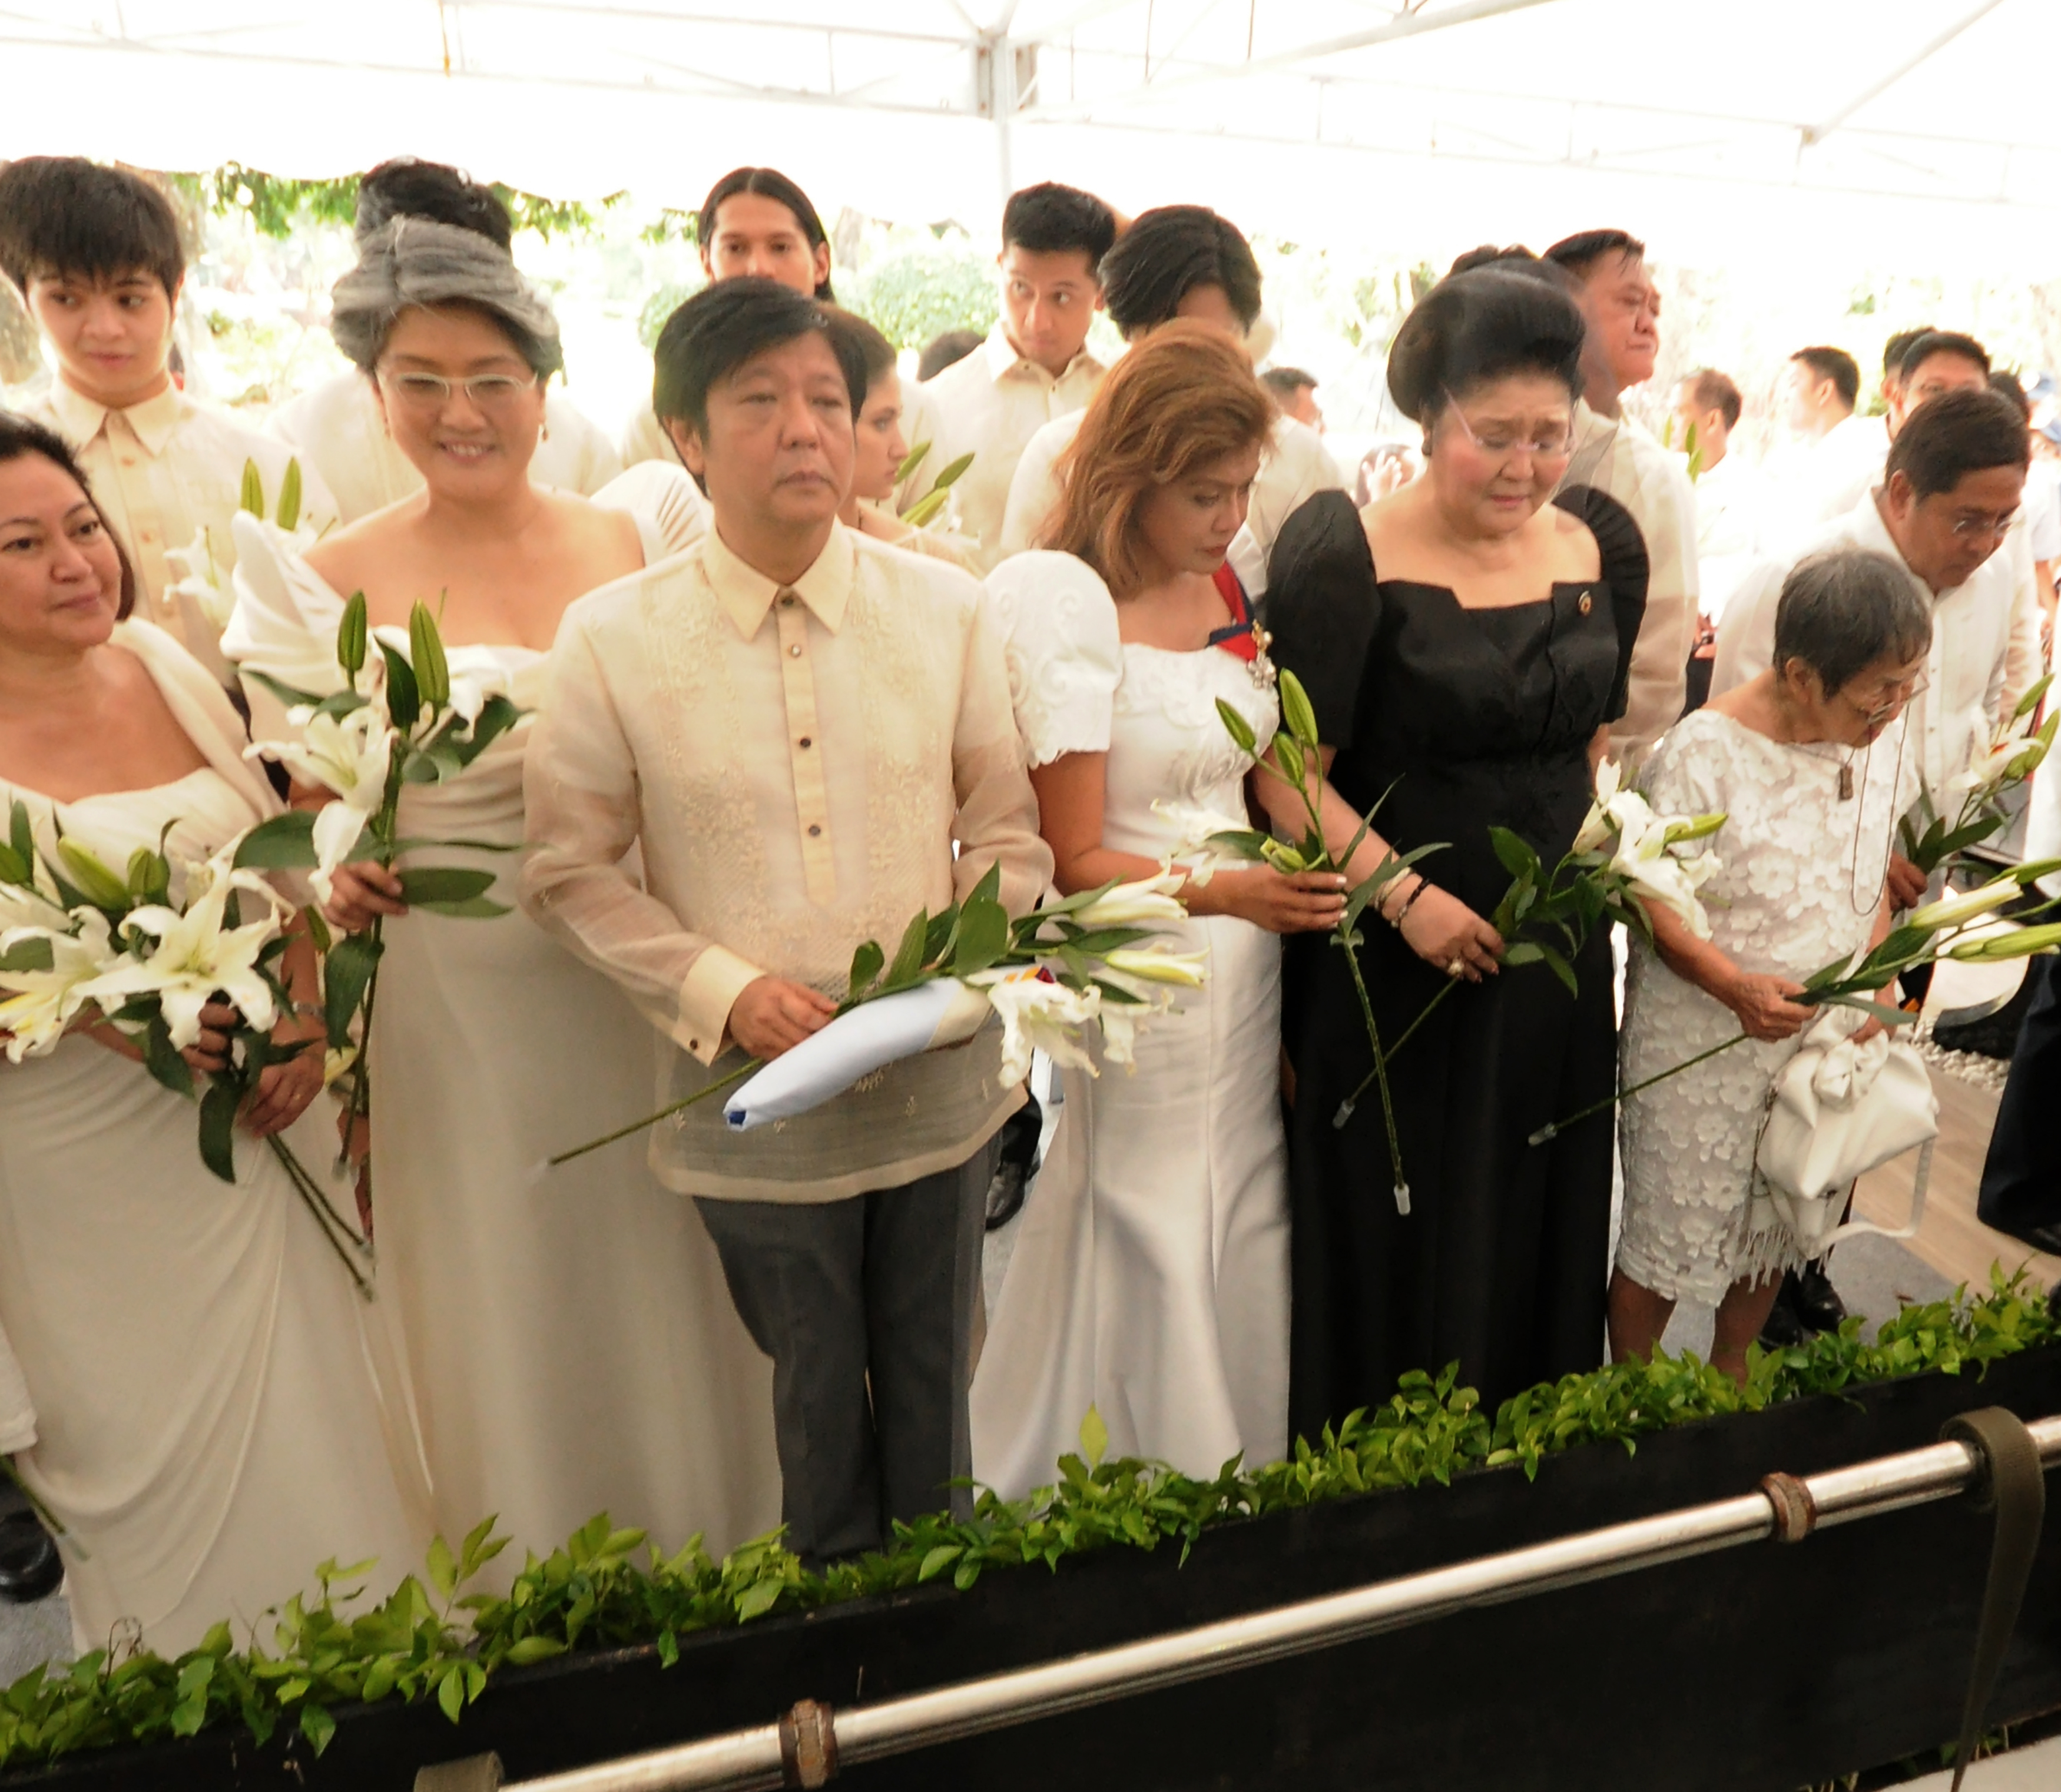 This handout photo taken on November 18, 2016 and released by the office of Governor Imee Marcos shows former first lady Imelda Marcos (in black) prepare to offer flowers with son Bongbong (3rd L), daughters Governor Imee (3rd R) and Irene (2nd L) during the burial of the late President Ferdinand Marcos at the national heroes' cemetery in Manila.  Marcos was buried at the national heroes' cemetery in a secretive ceremony November 18, outraging opponents   / AFP PHOTO / Office of Governor Imee Marcos / HO